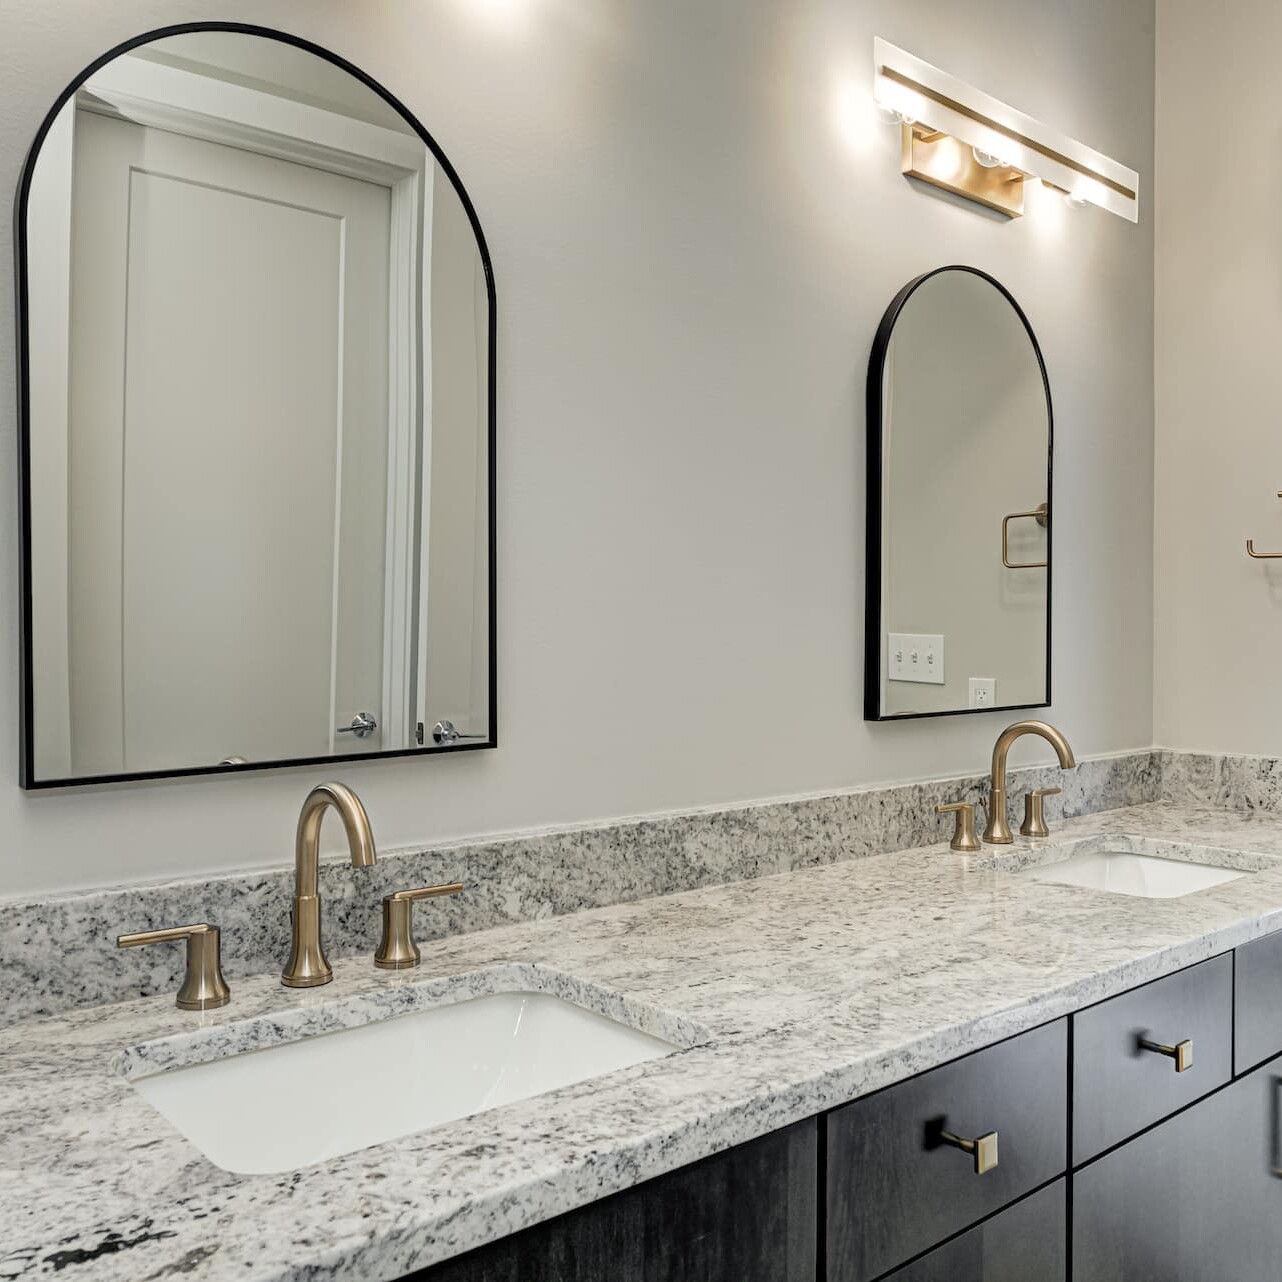 A bathroom with two sinks and a mirror, designed and built by a top-tier custom home builder in Carmel, Indiana.